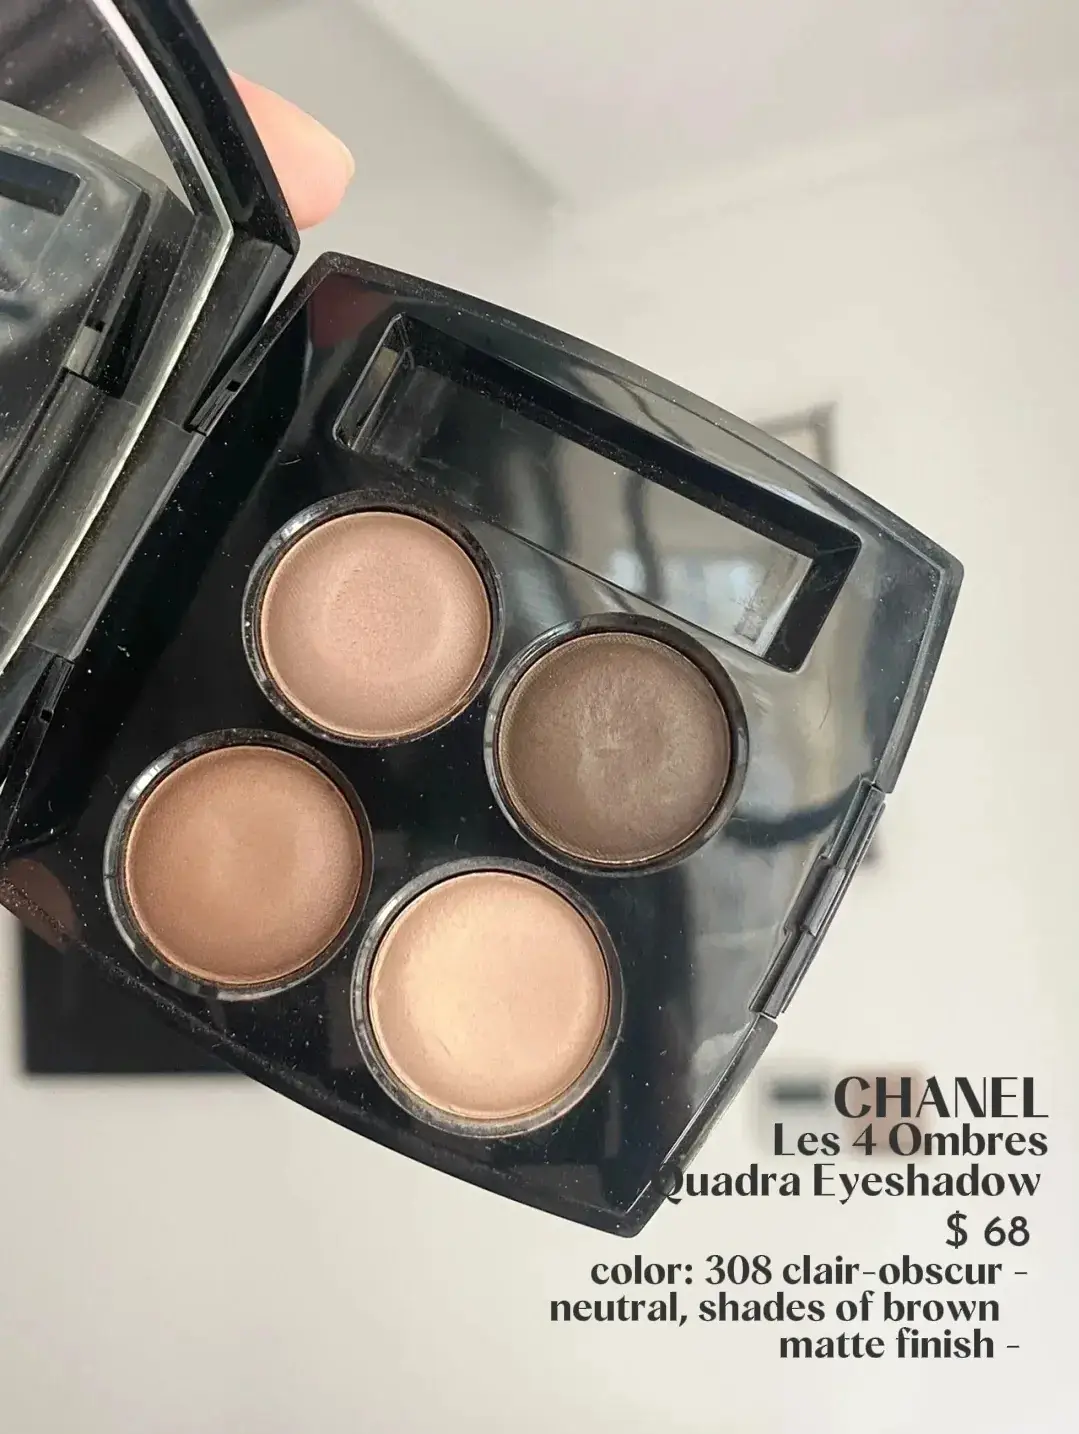 Chanel Clair-Obscur (308) Les 4 Ombres Multi-Effect Quadra Eyeshadow Review  & Swatches